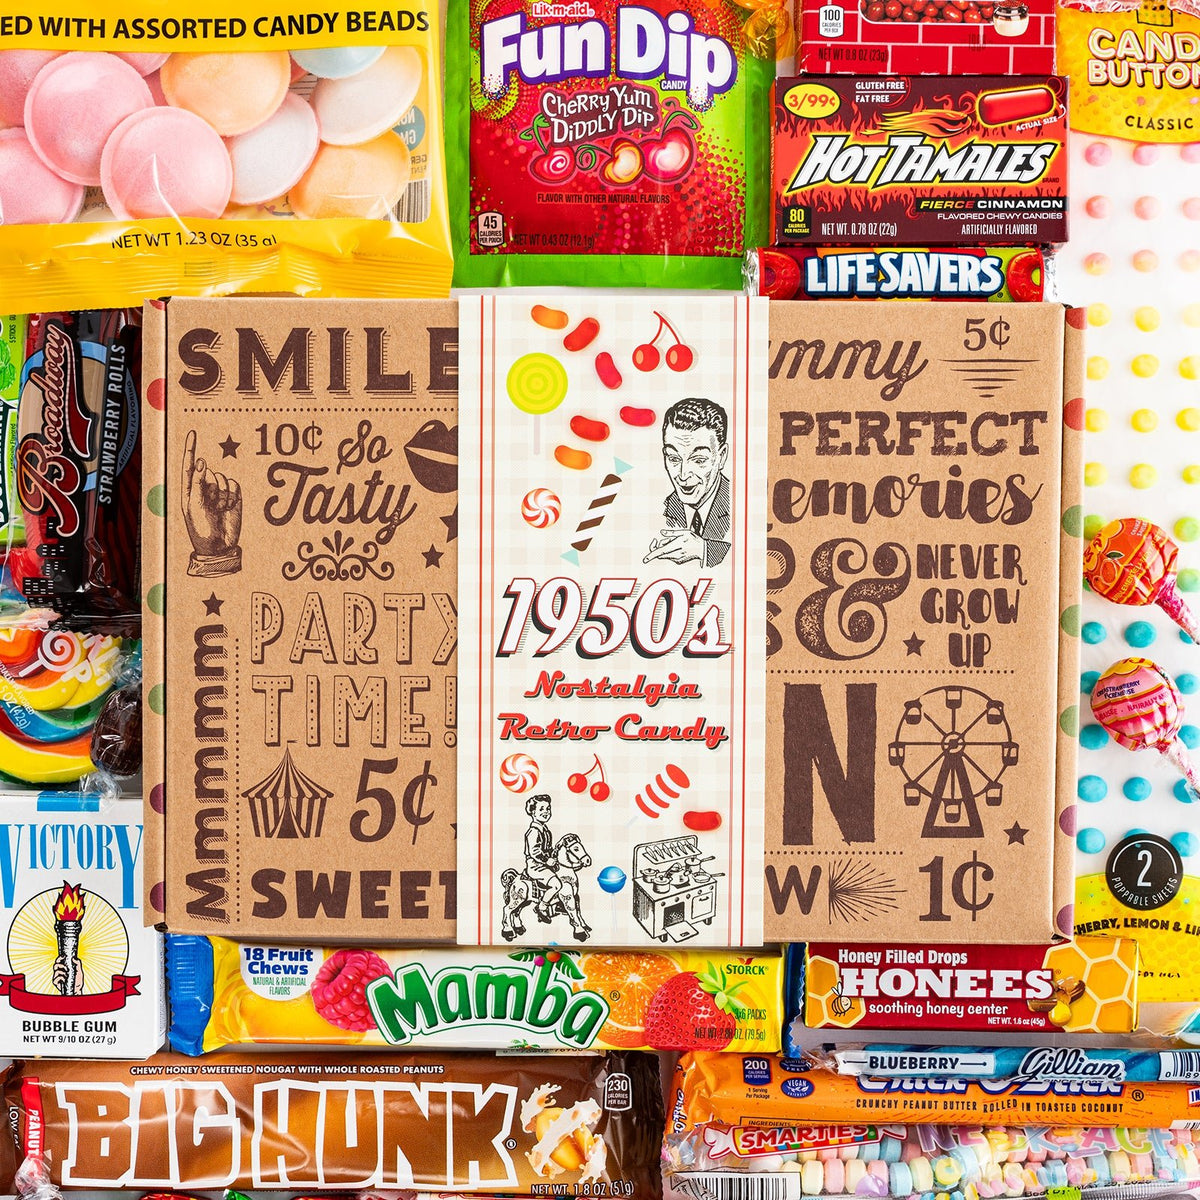 Movie Theater Candy – Vintage Candy Co.